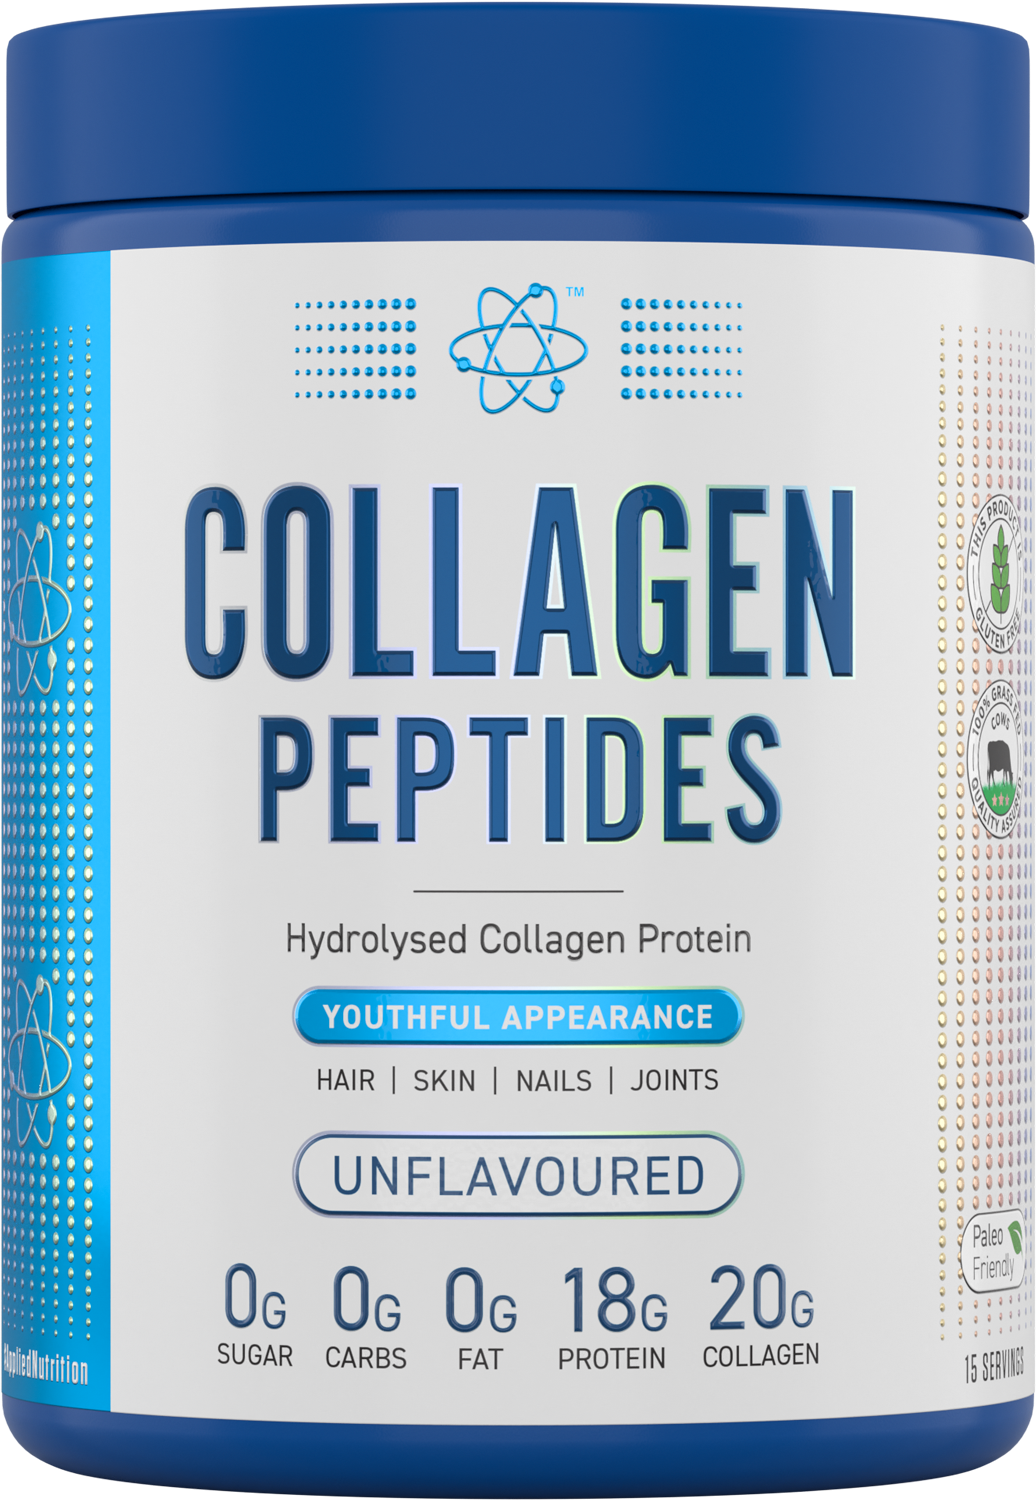 APPLIED NUTRITION COLLAGEN PEPTIDES